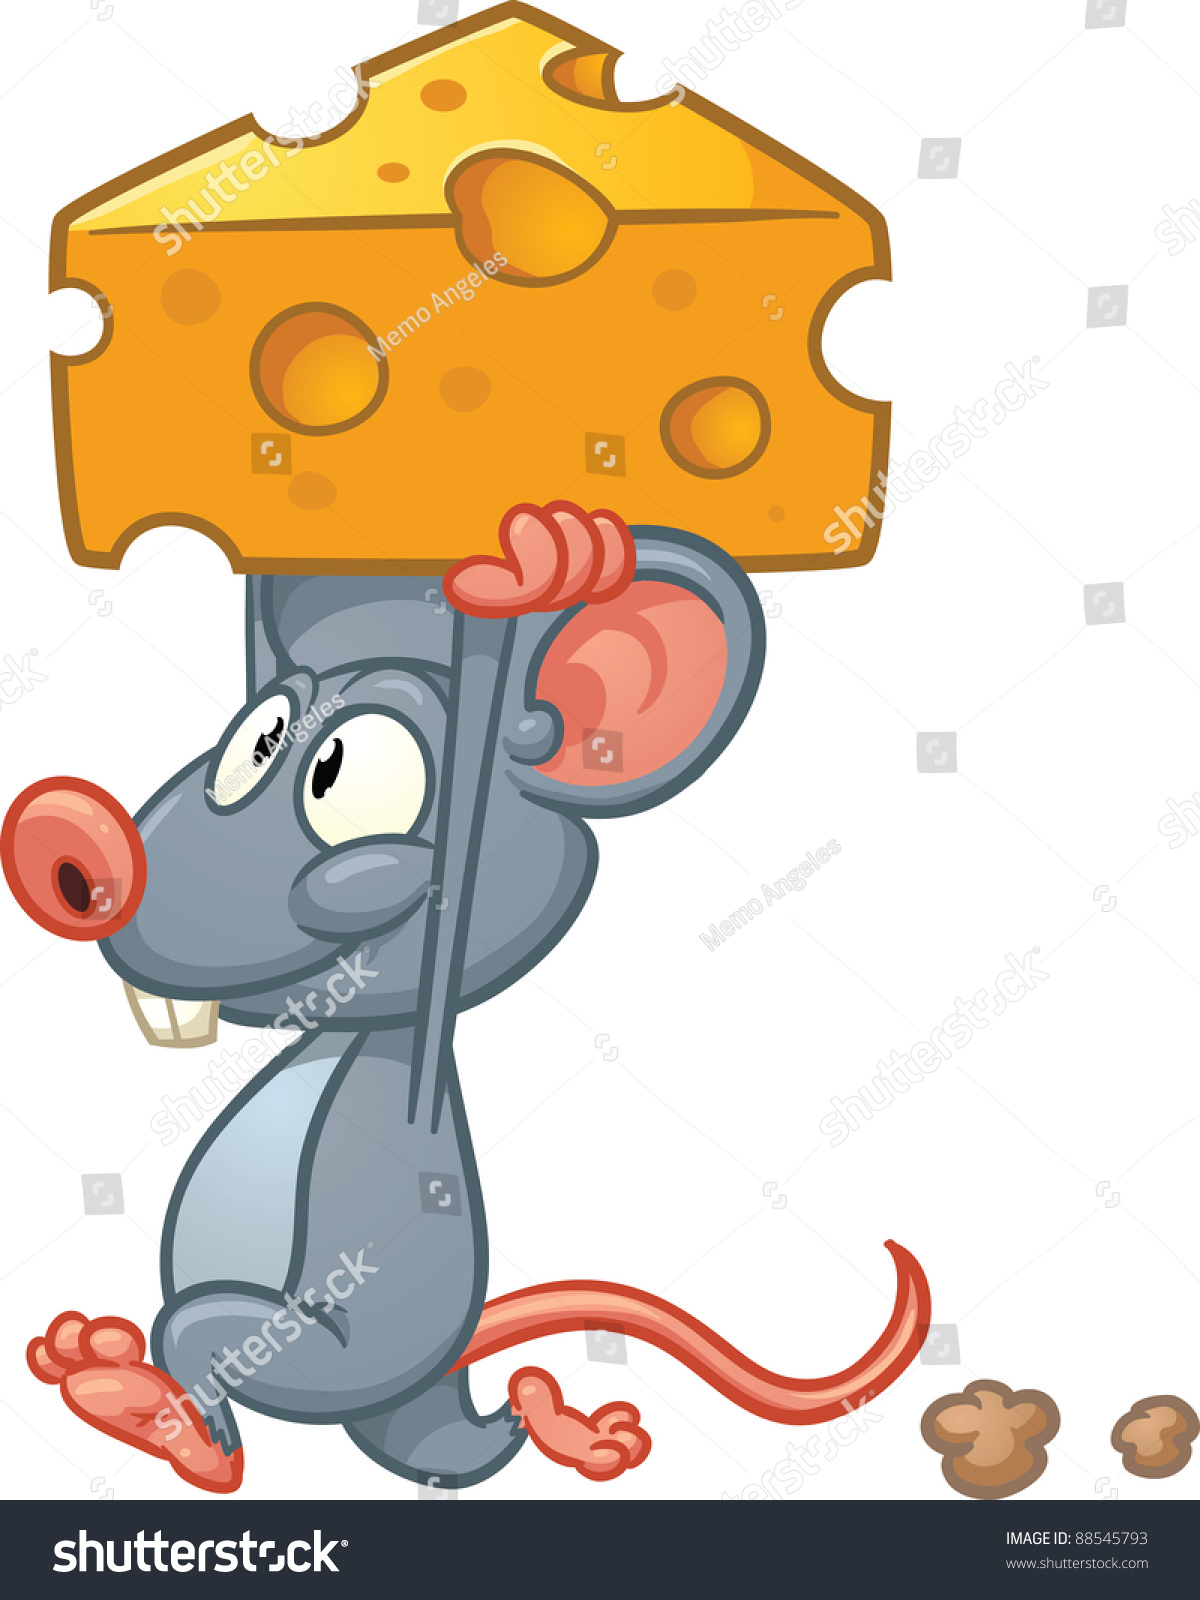 girl mouse clipart - photo #16